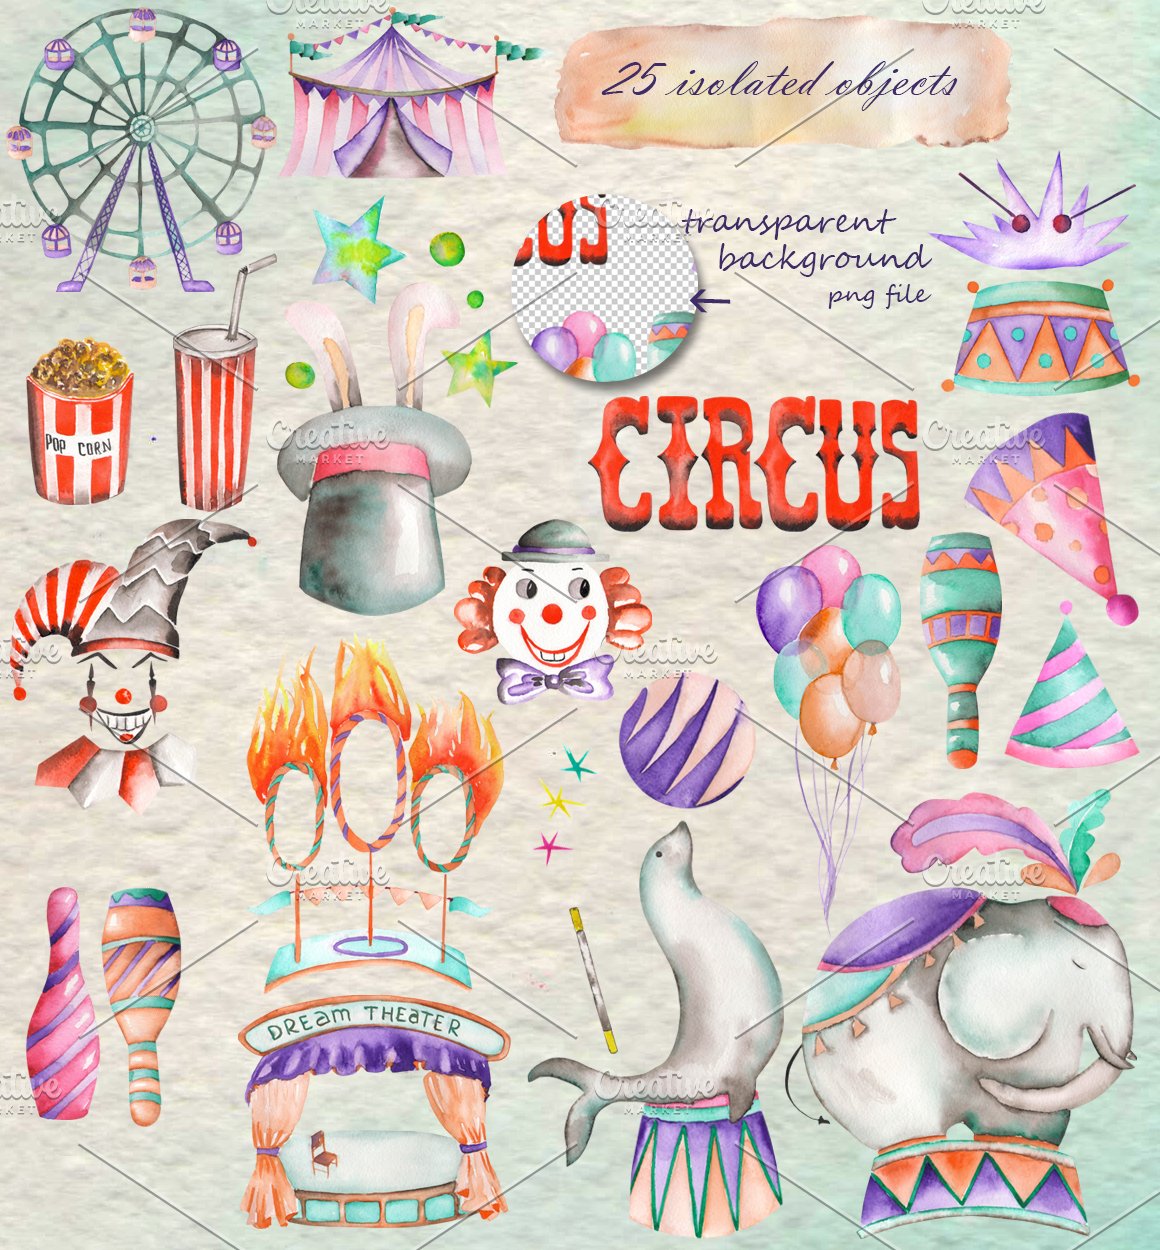 Image of the circus and its elements.